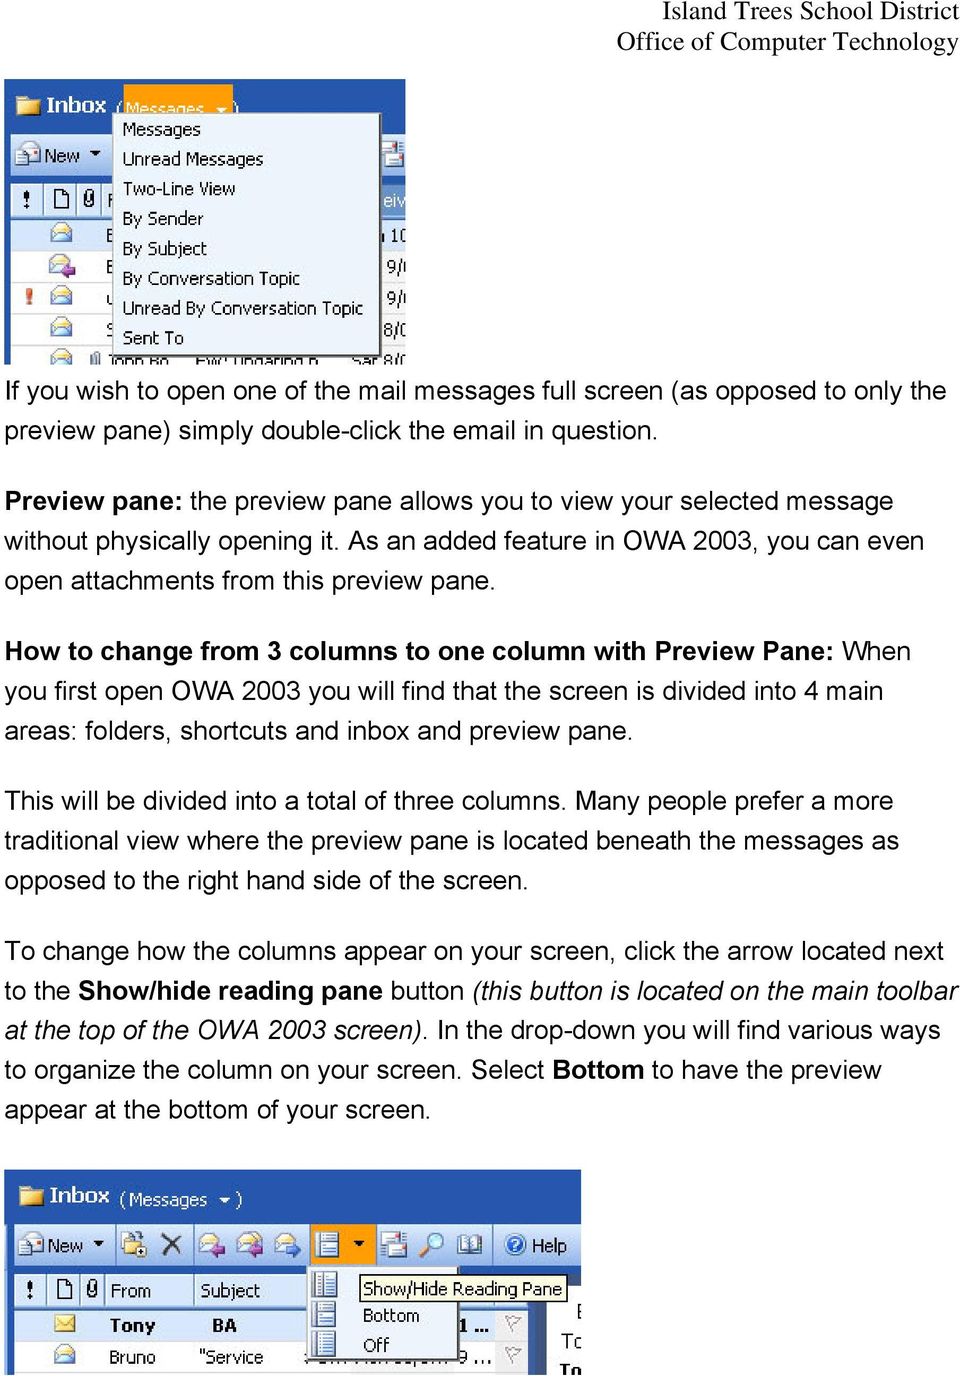 How to change from 3 columns to one column with Preview Pane: When you first open OWA 2003 you will find that the screen is divided into 4 main areas: folders, shortcuts and inbox and preview pane.